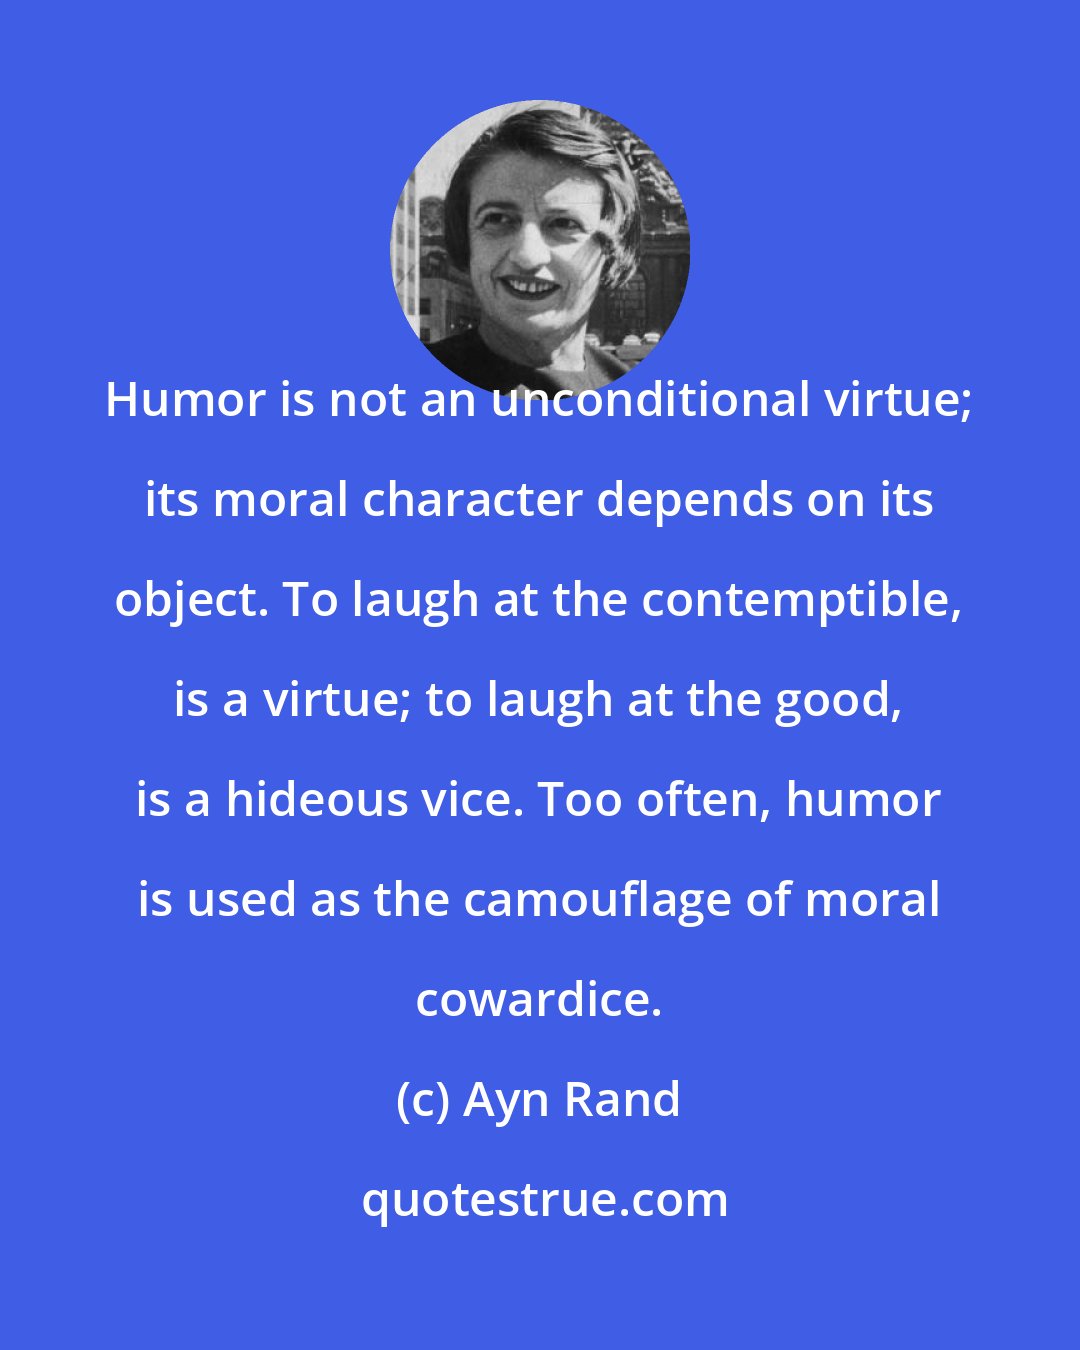 Ayn Rand: Humor is not an unconditional virtue; its moral character depends on its object. To laugh at the contemptible, is a virtue; to laugh at the good, is a hideous vice. Too often, humor is used as the camouflage of moral cowardice.